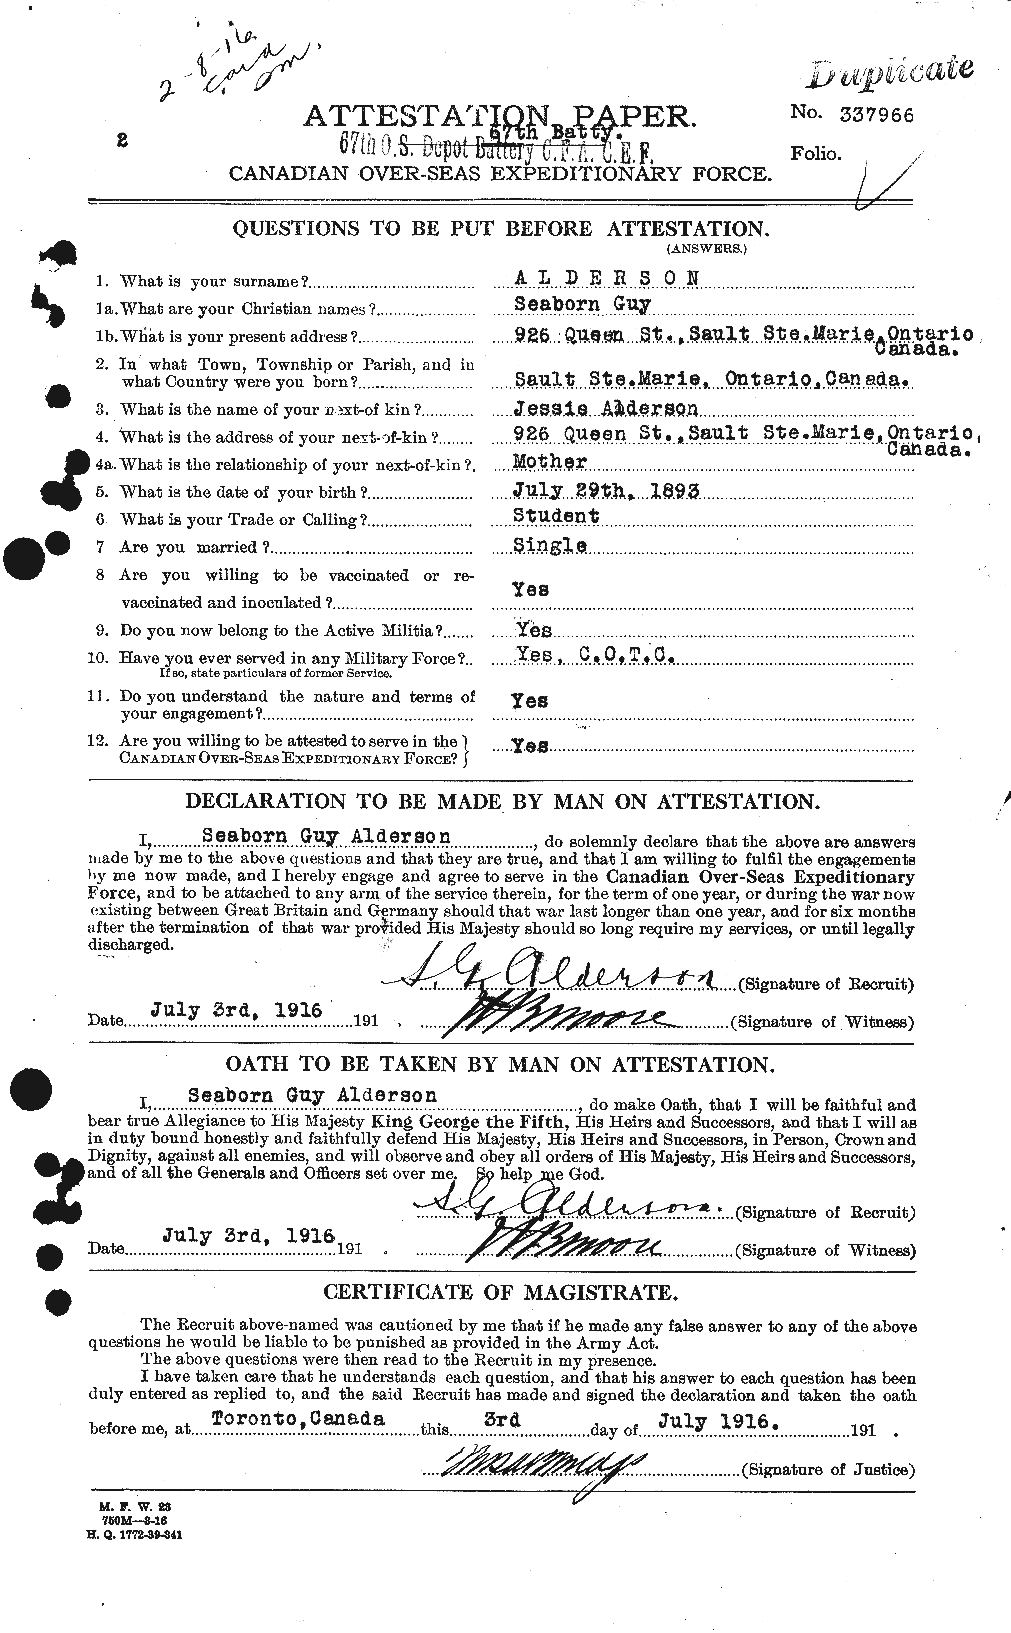 Personnel Records of the First World War - CEF 204887a